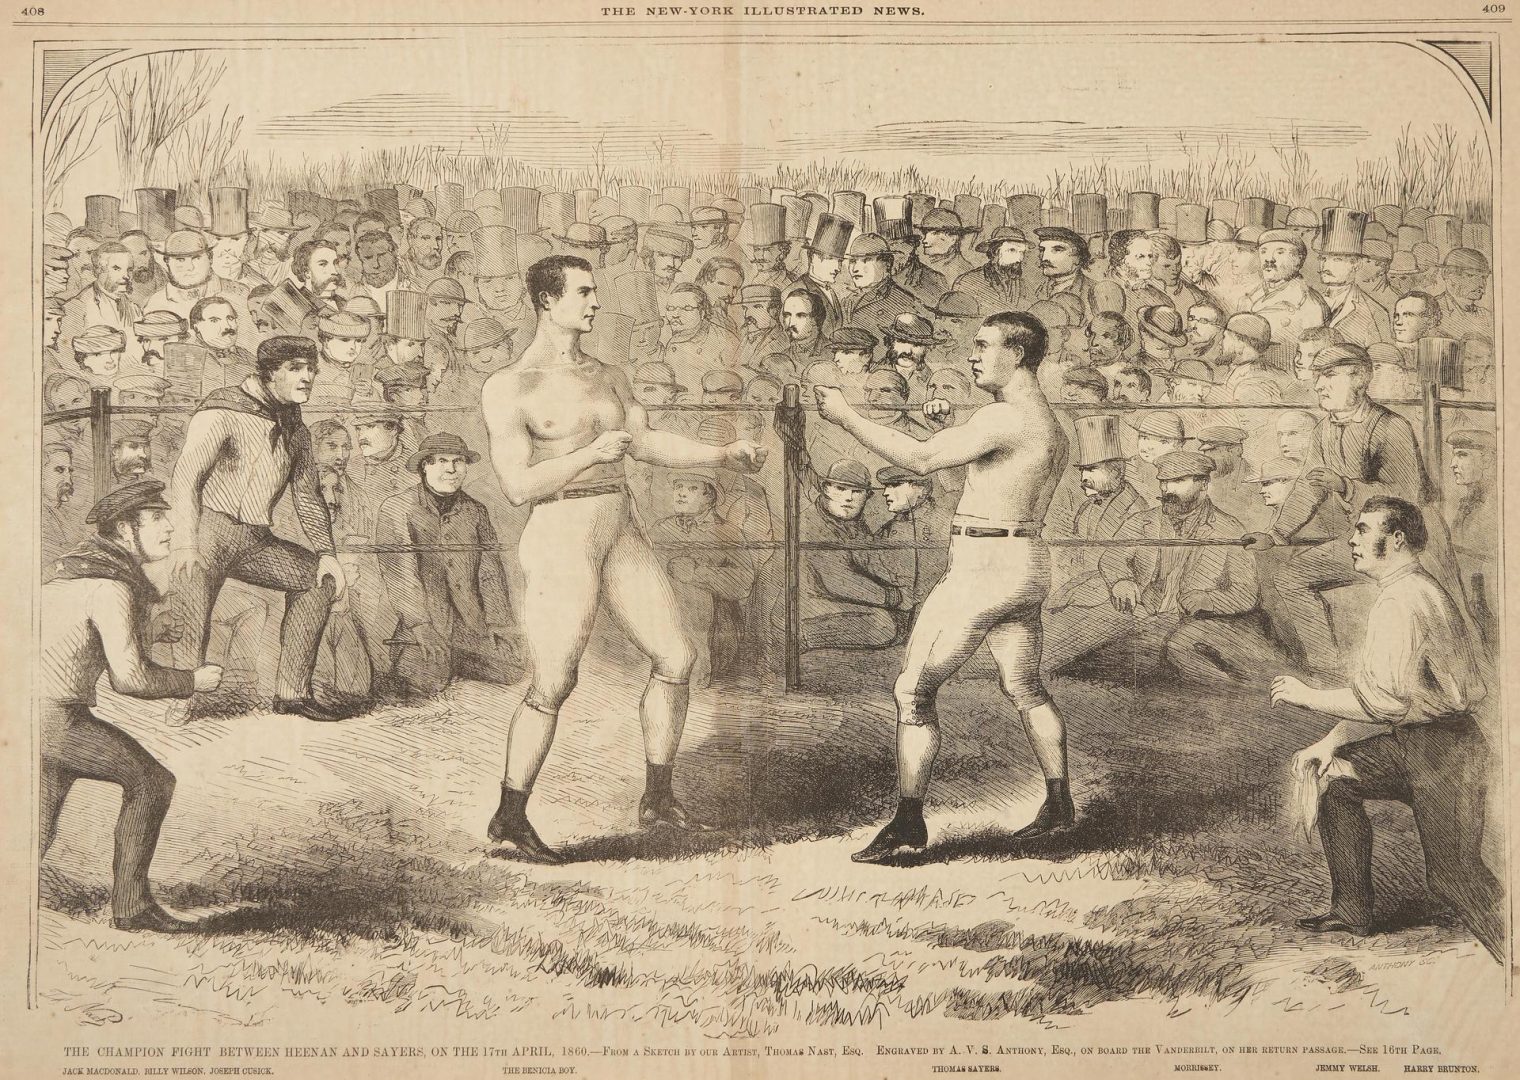 Lot 563: Collection of 6 Boxing Pugilist Prints, 19th Century